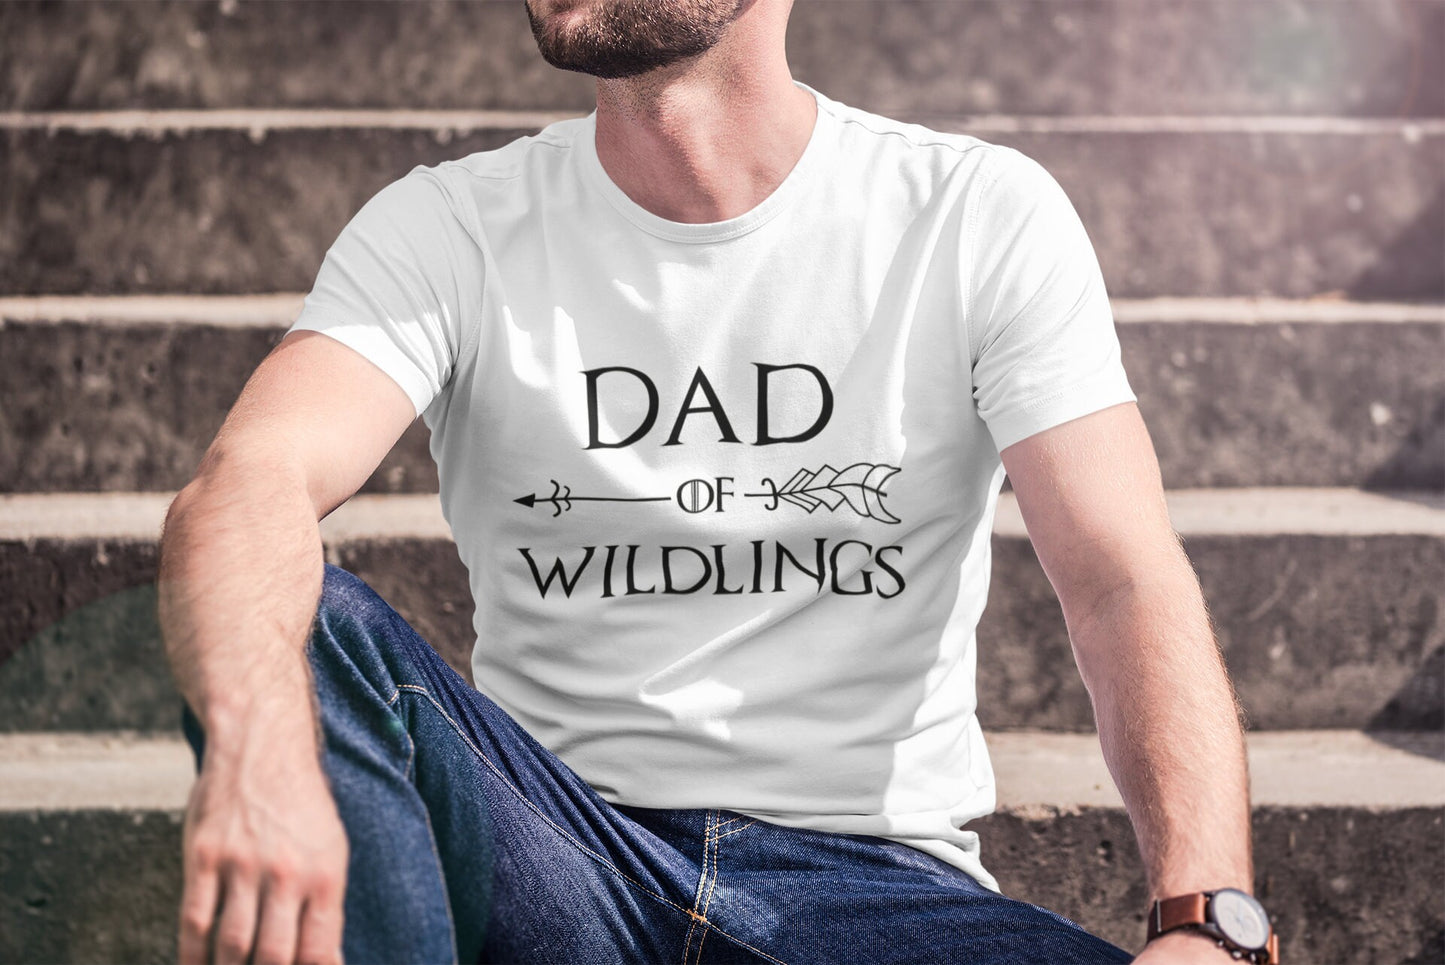 Dad of Wildlings - Game of Throne inspired Father's Day shirt